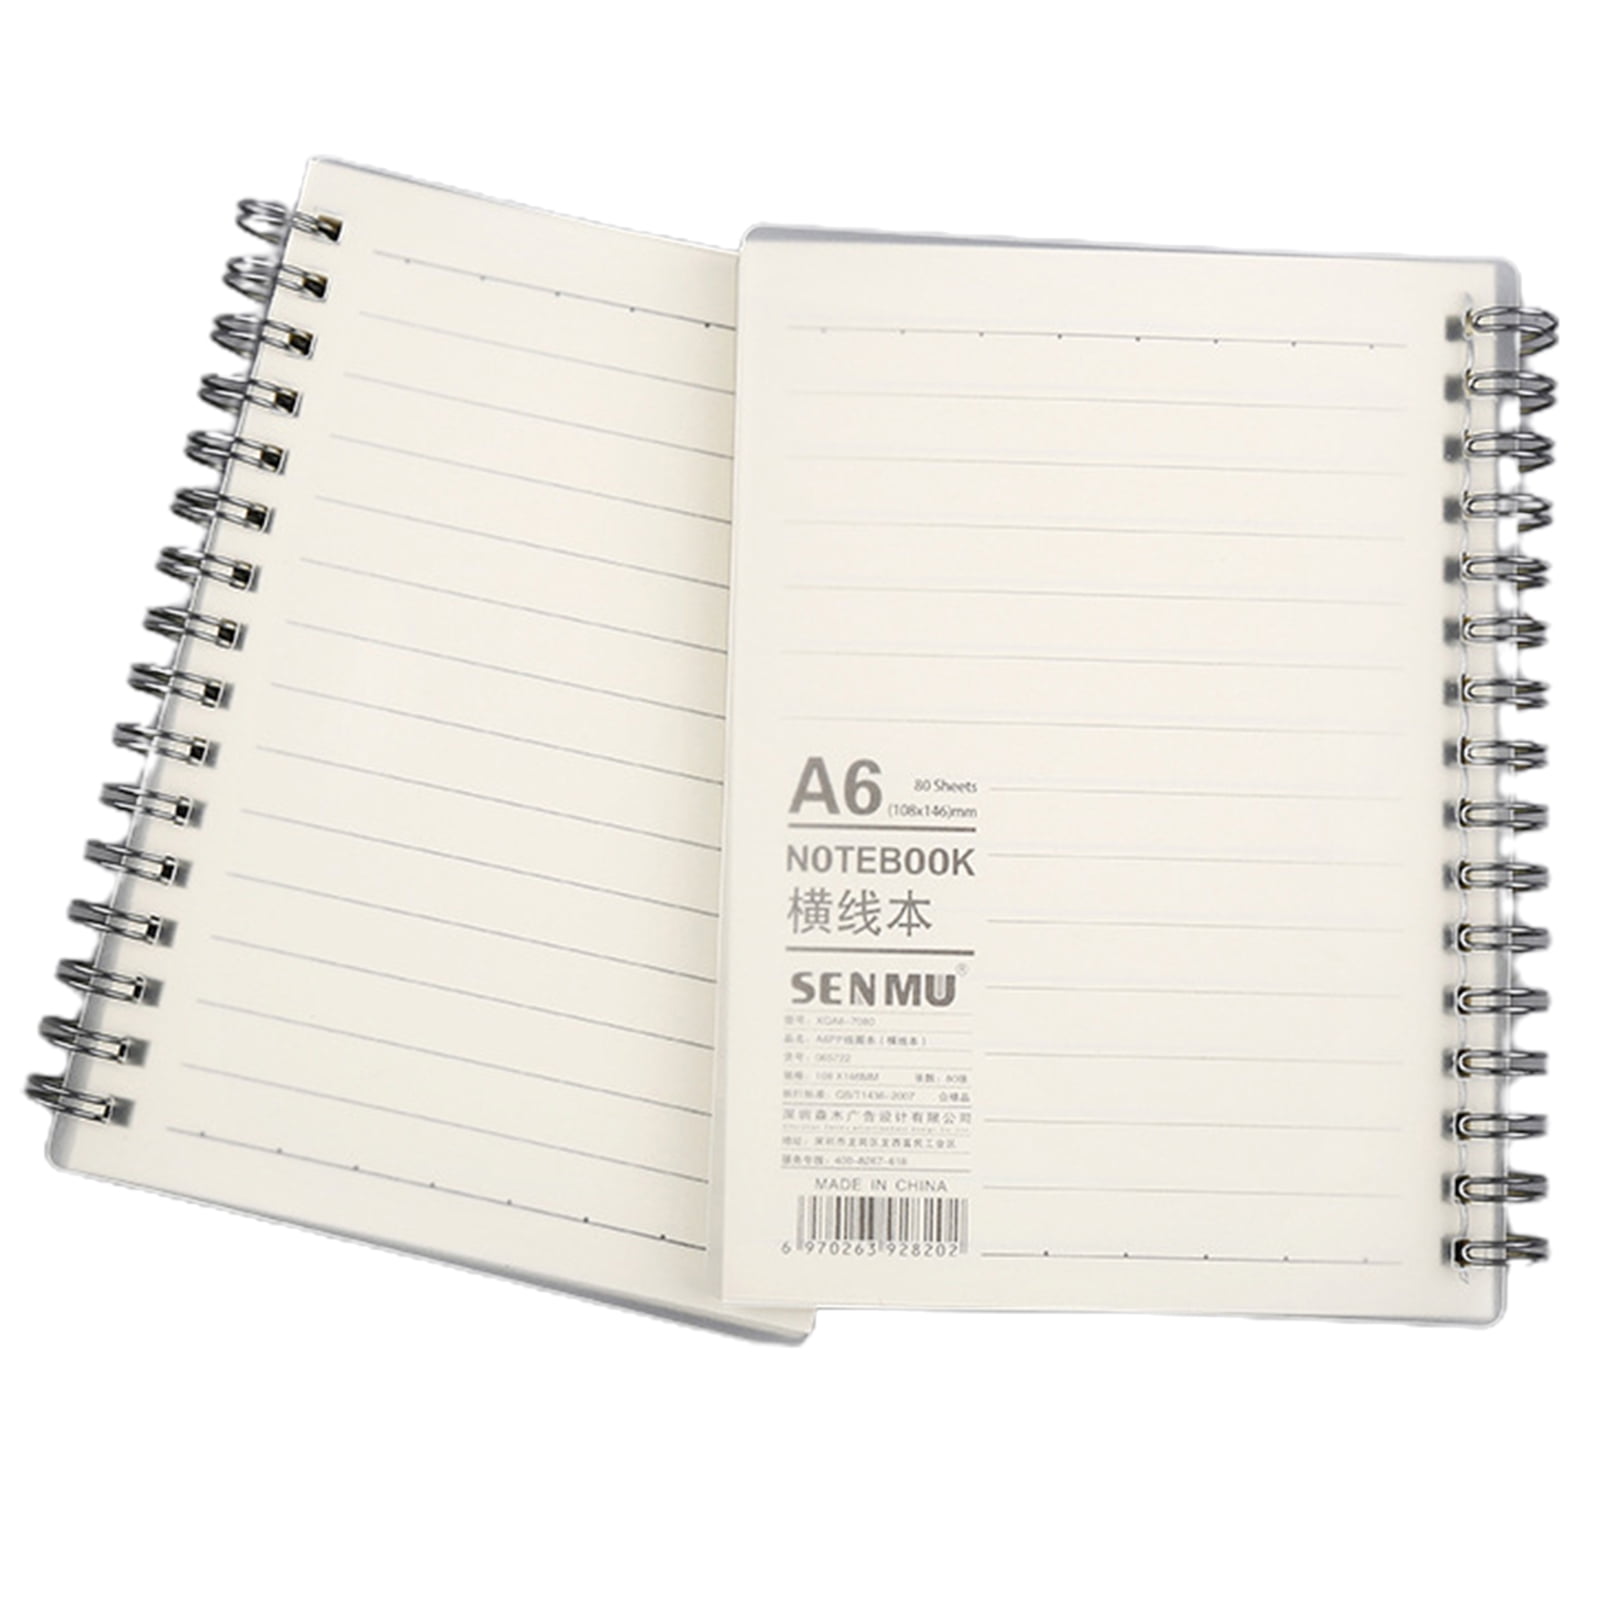 Spiral Notebook Blank Grid Pages Lined Journal Diary Sketchbook School Supplies 